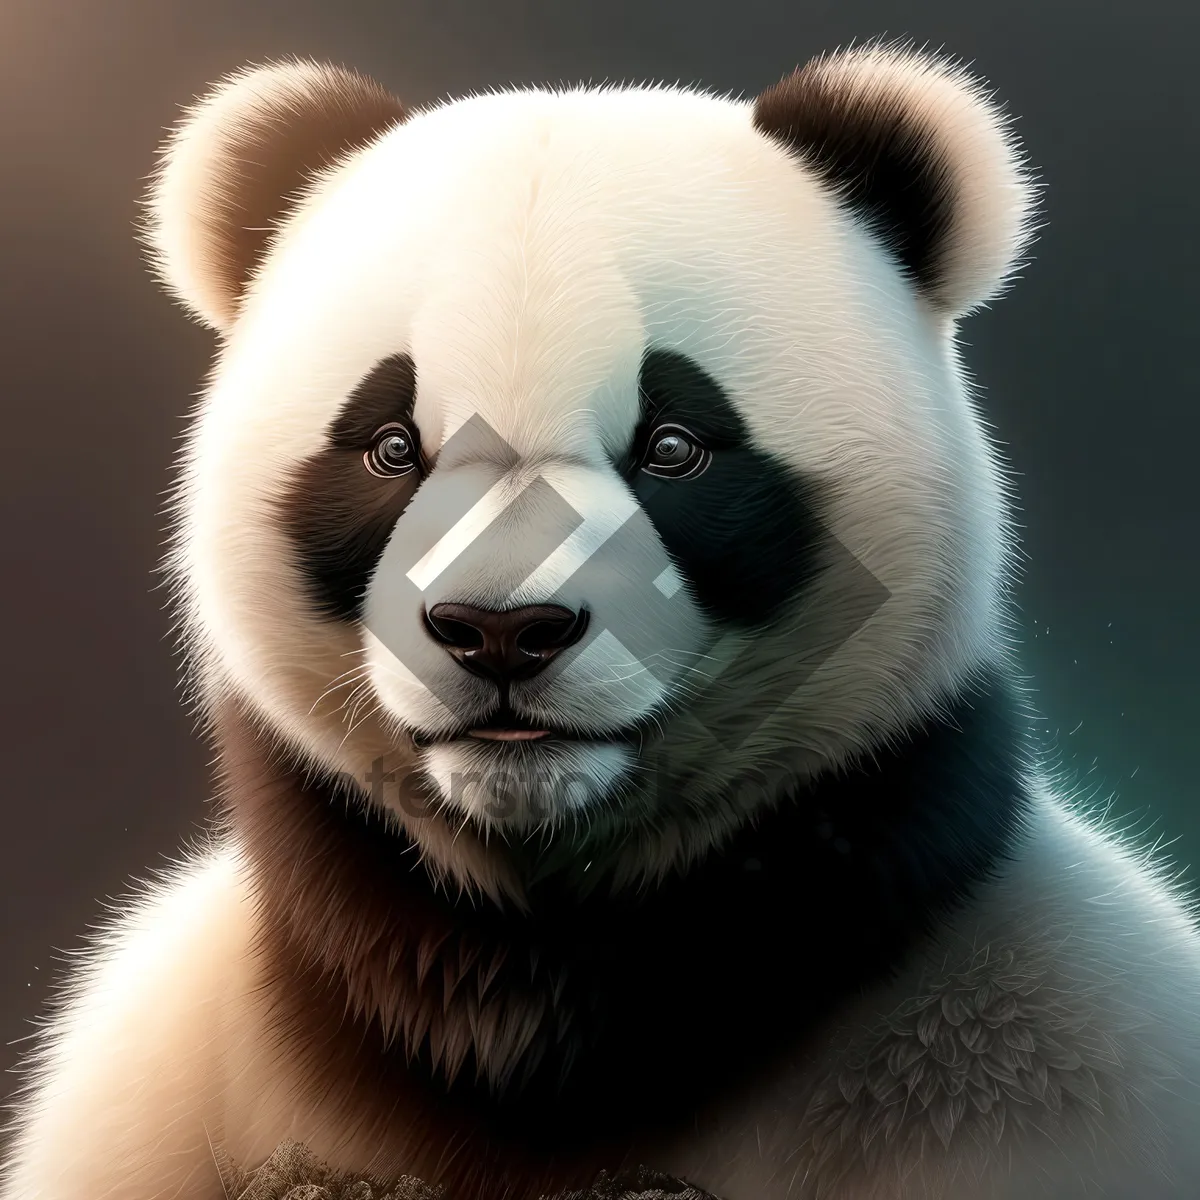 Picture of Adorable Giant Panda Bear in the Wild